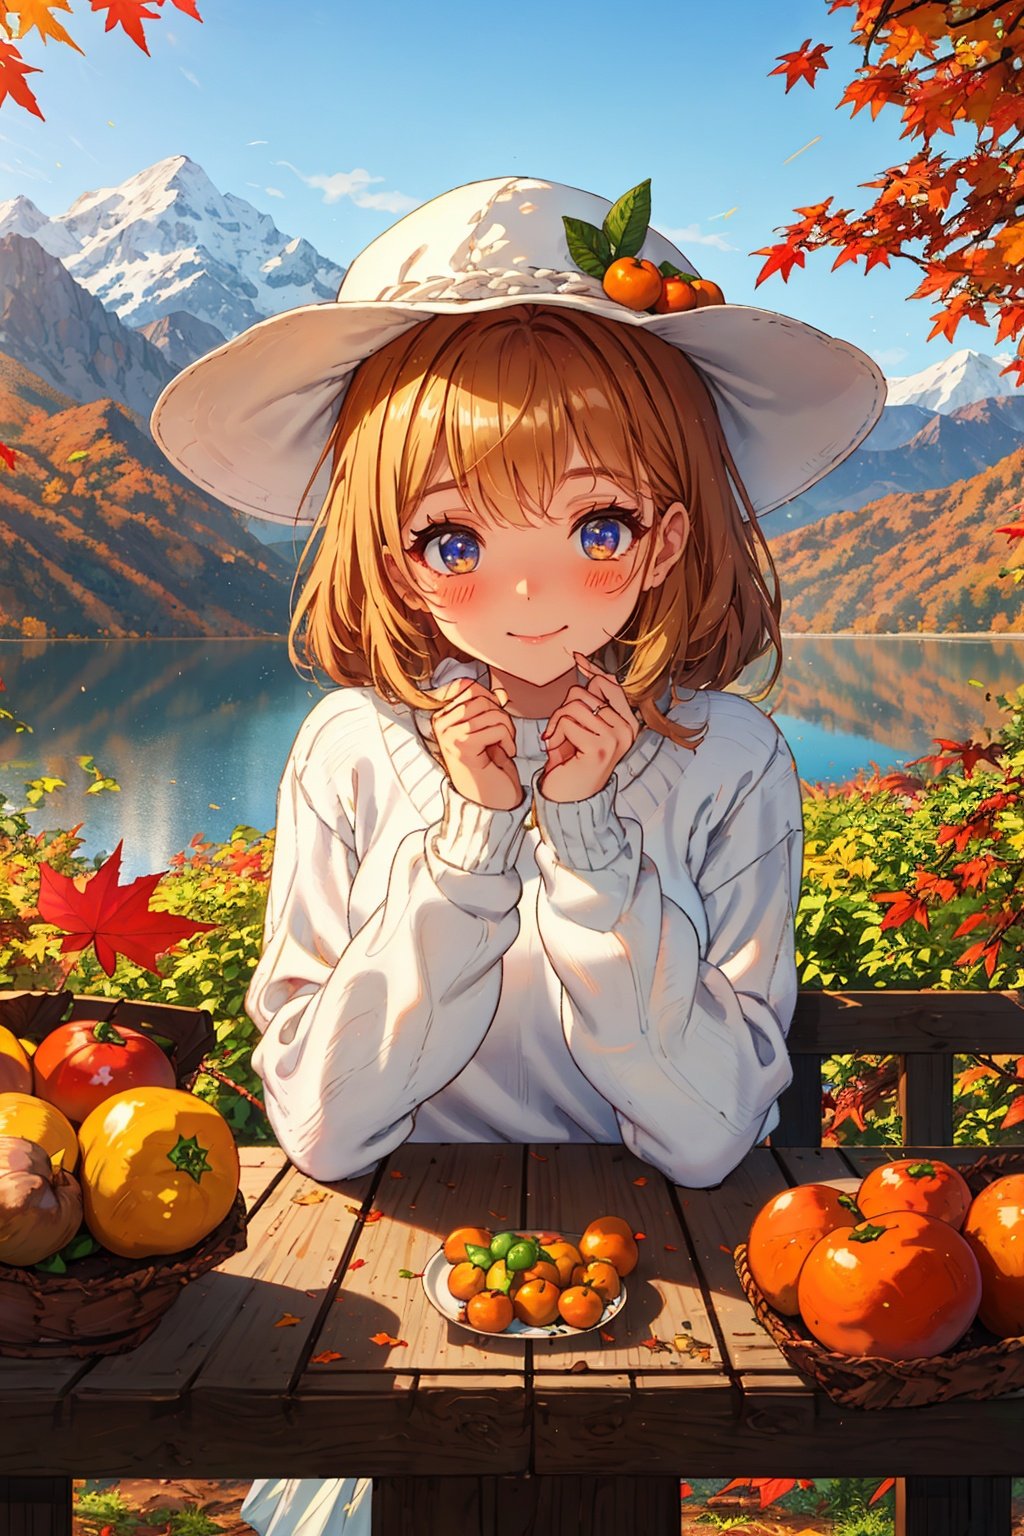 A beautiful Korean girl,White rabbit ear hat, white sweater,morning dew in autumn, maple leaves, serene lake surface, mountains, open-air cafe, cabin, campfire, fishing, mountain trails, autumn wedding,golden autumn leaves, autumn colors, autumn breeze, wisps of smoke, dew, autumn scenery, harvest season, warm sunlight, persimmons, grapes, ripe fruits, 